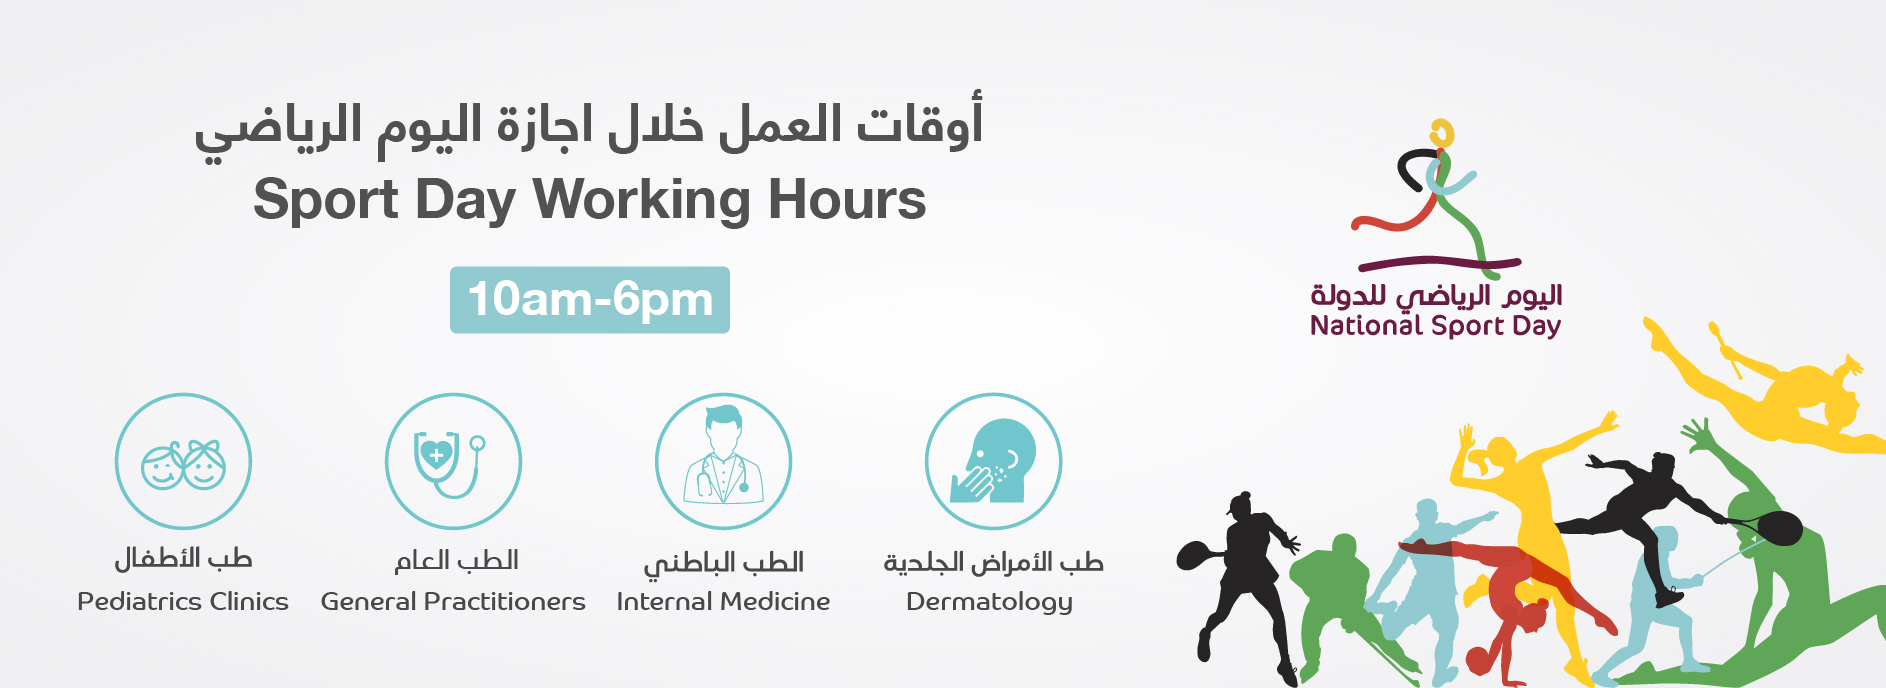 Sports Day Working Hours